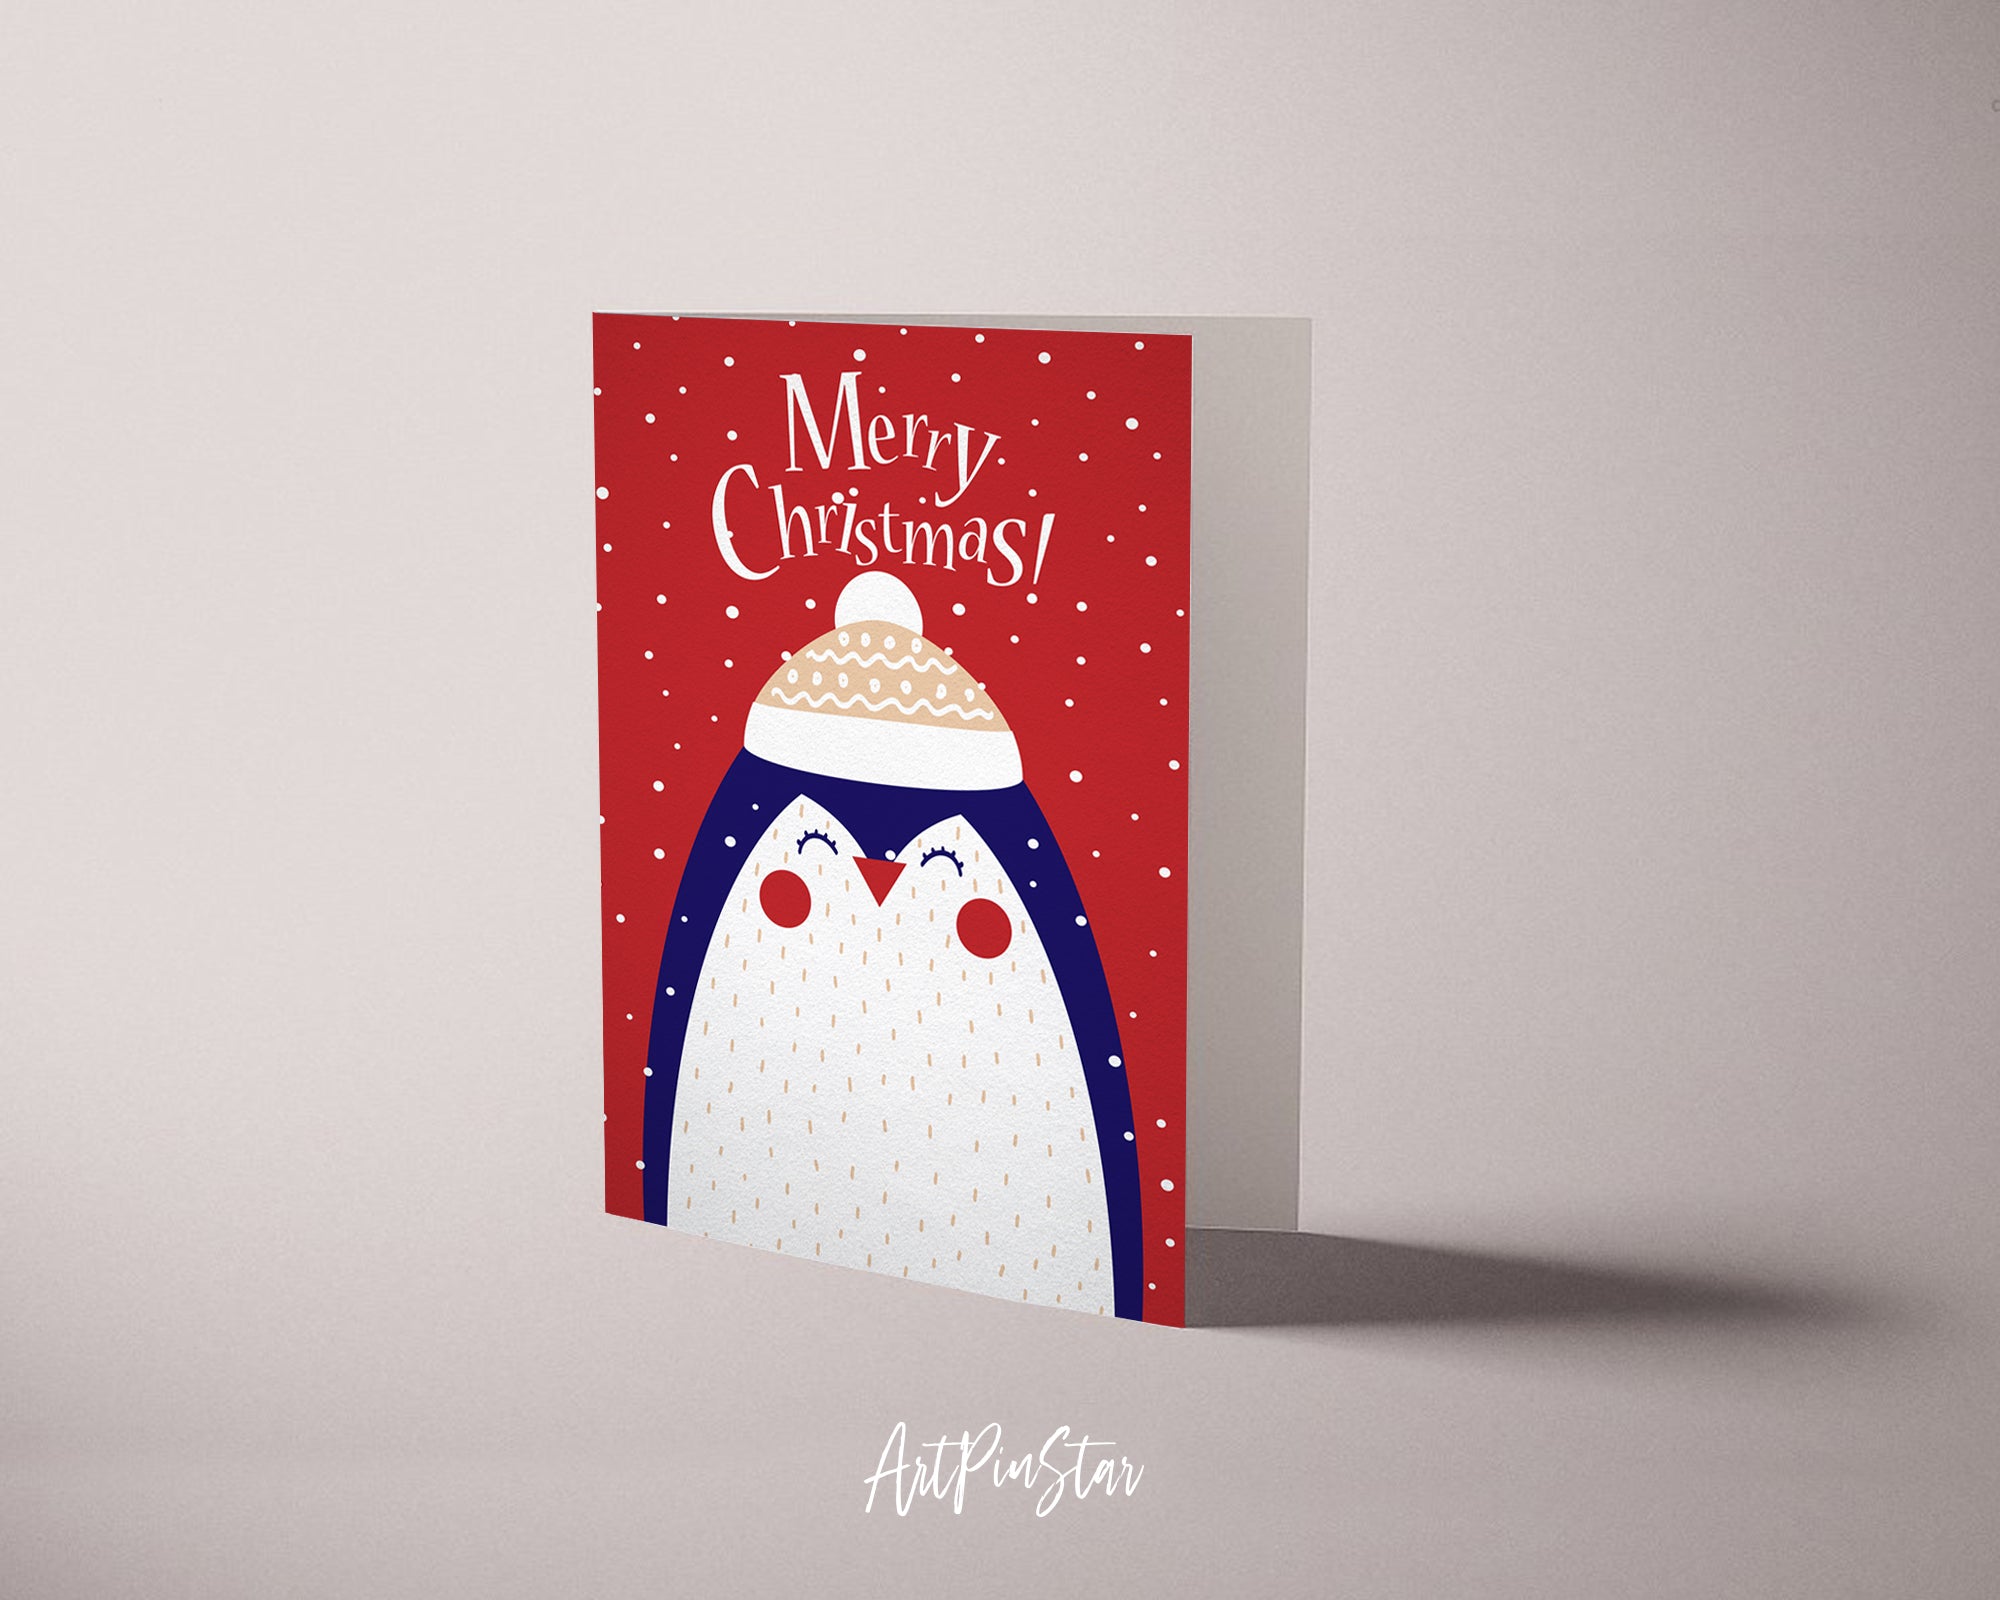 Merry Christmas-Penguin Personalized Holiday Greeting Card Gifts